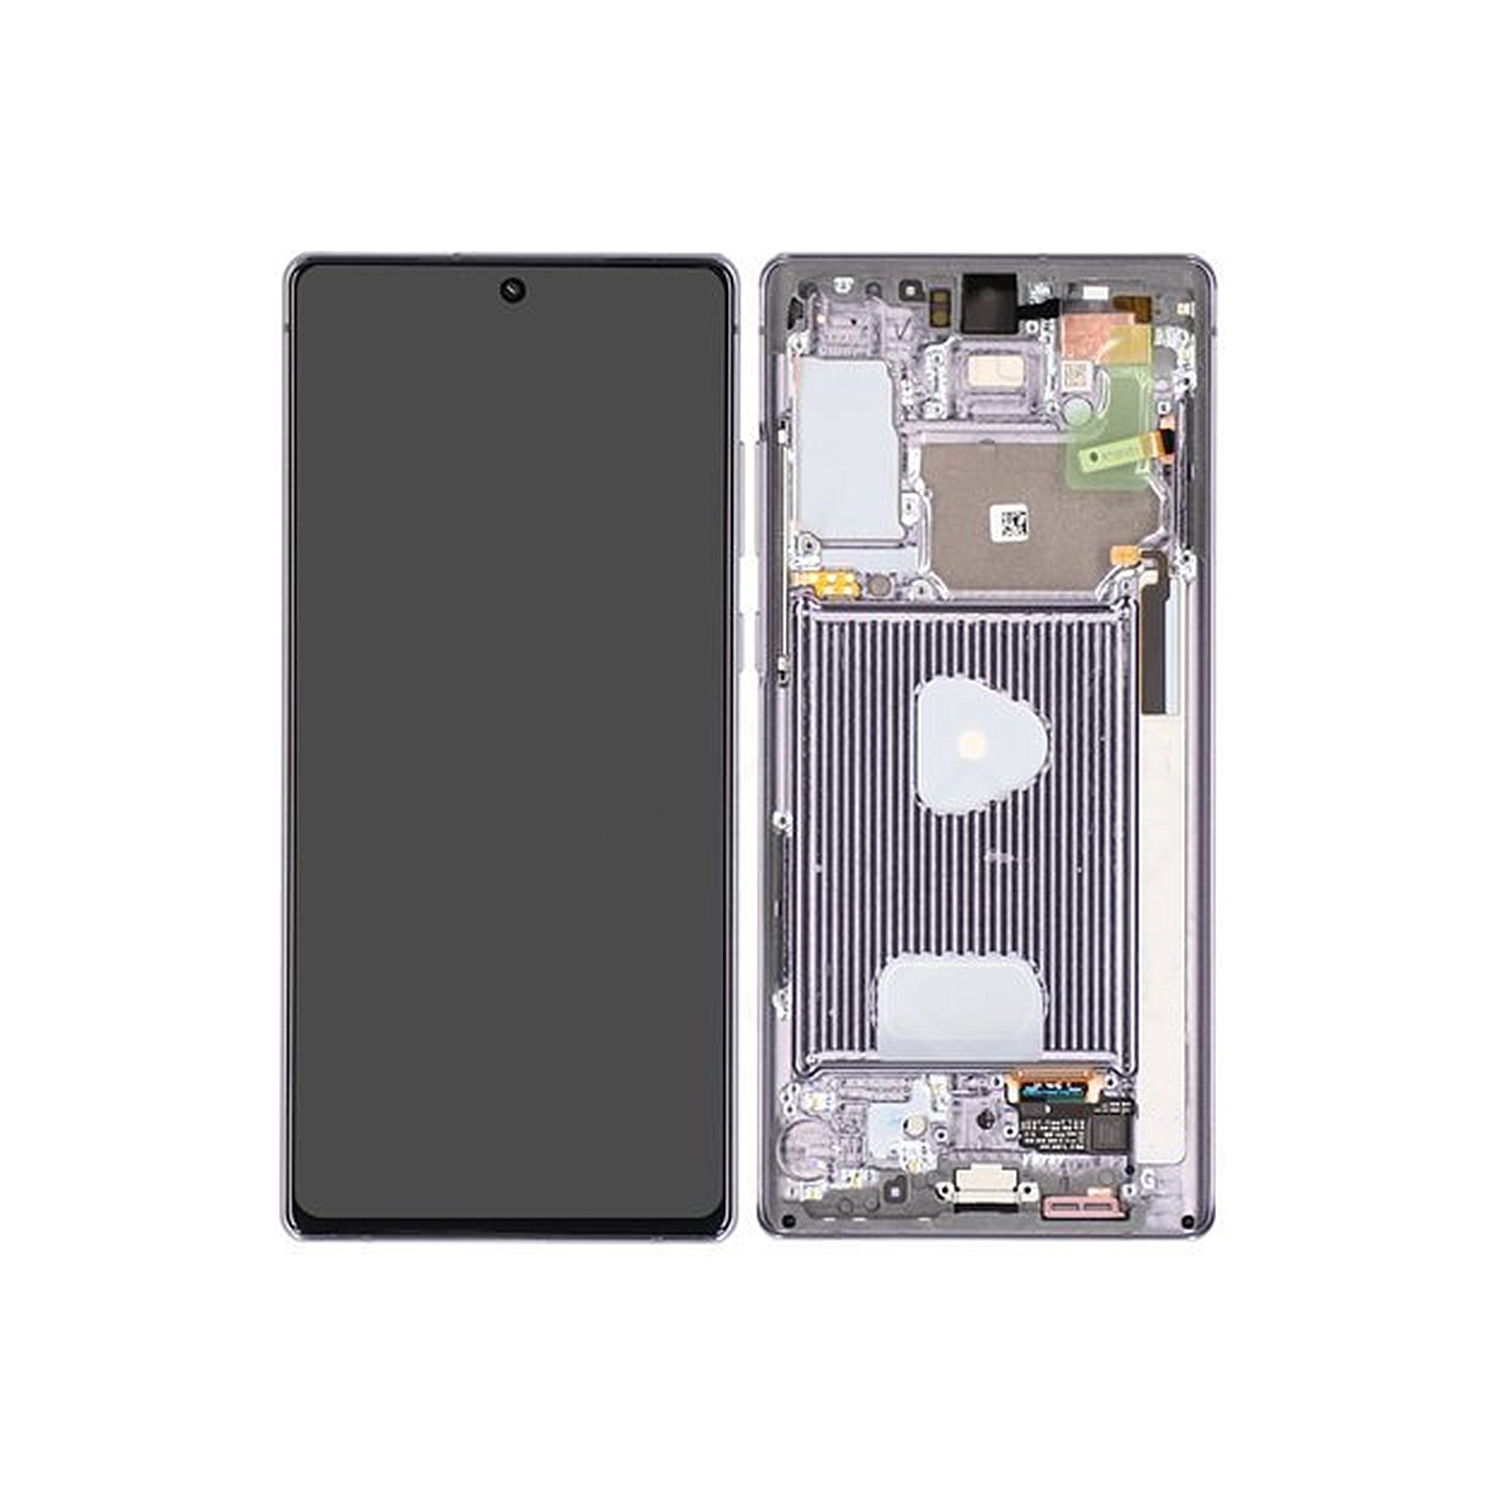 Replacement LCD Display Touch Screen Digitizer Assembly + Frame For Samsung Galaxy Note 20 5G (SM-N981W) - Mystic Grey